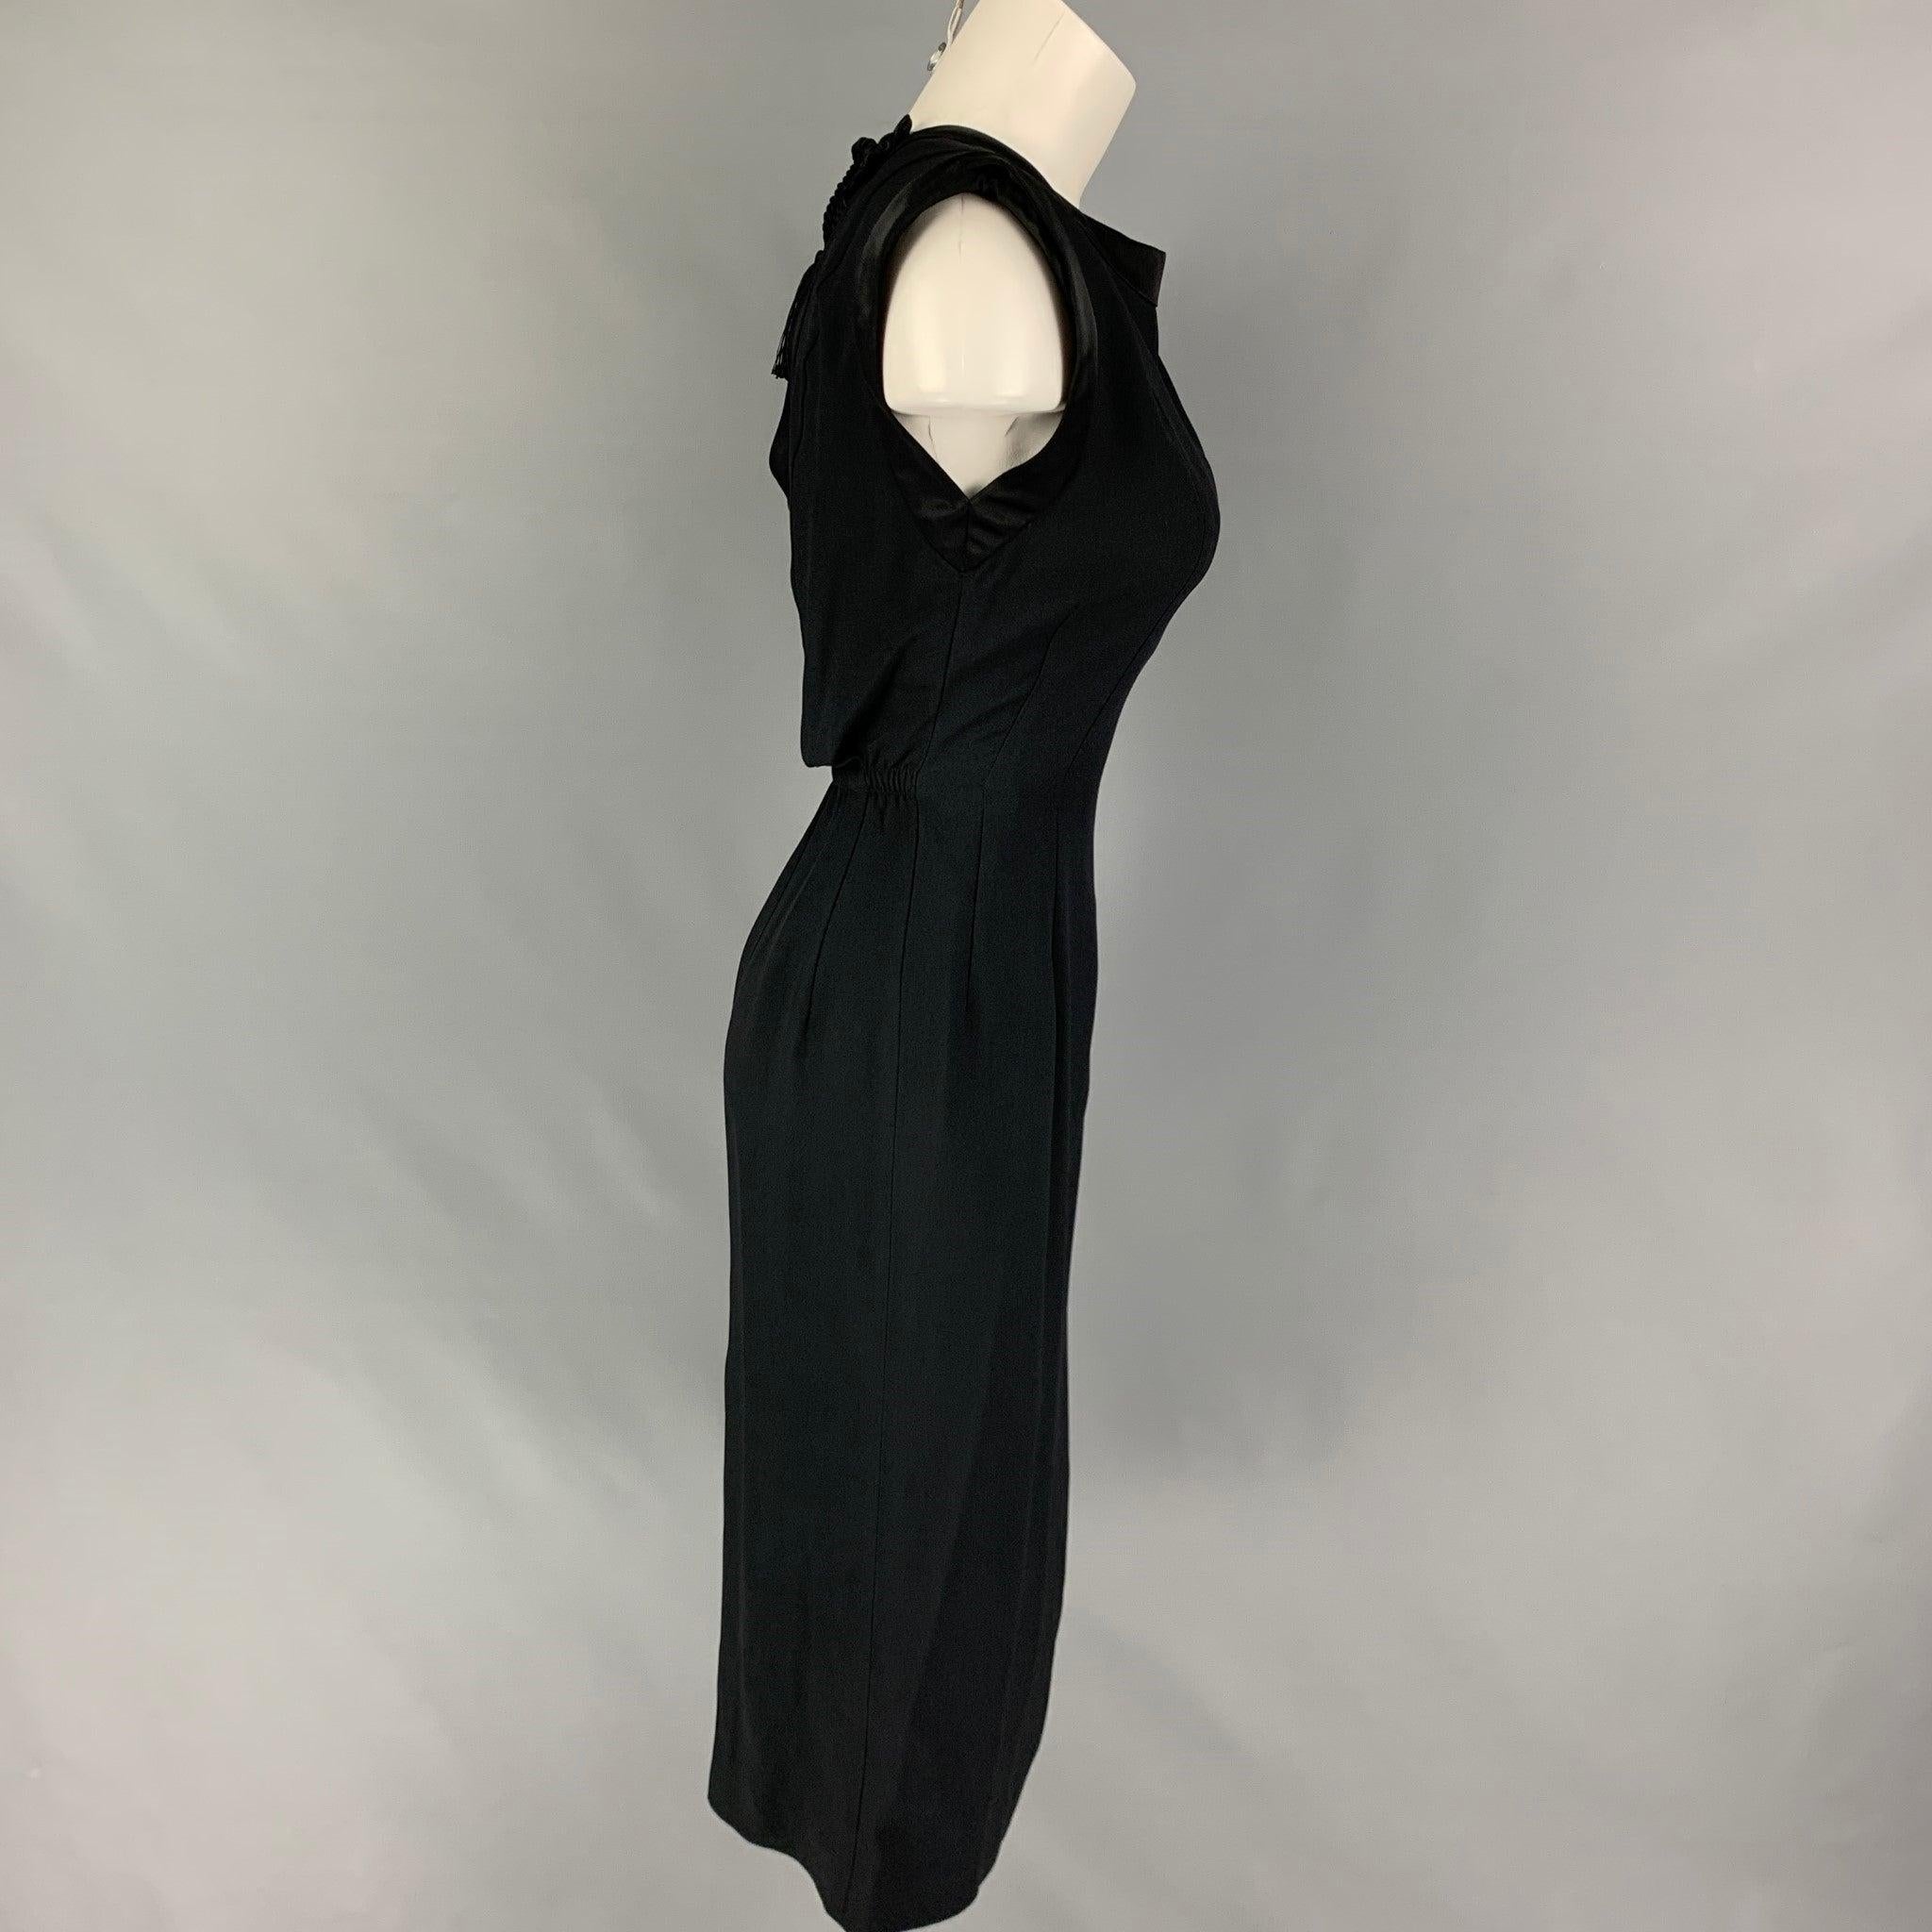 ALBERTA FERRETTI cocktail dress comes in a black acetate / viscose featuring an a-line style, sleeveless, back tassel details, and a side zipper closure.
New with tags. 

Marked:  I 38 / F 34 / D 34 / GB 6 / US 2 

Measurements: 
 
Shoulder: 16